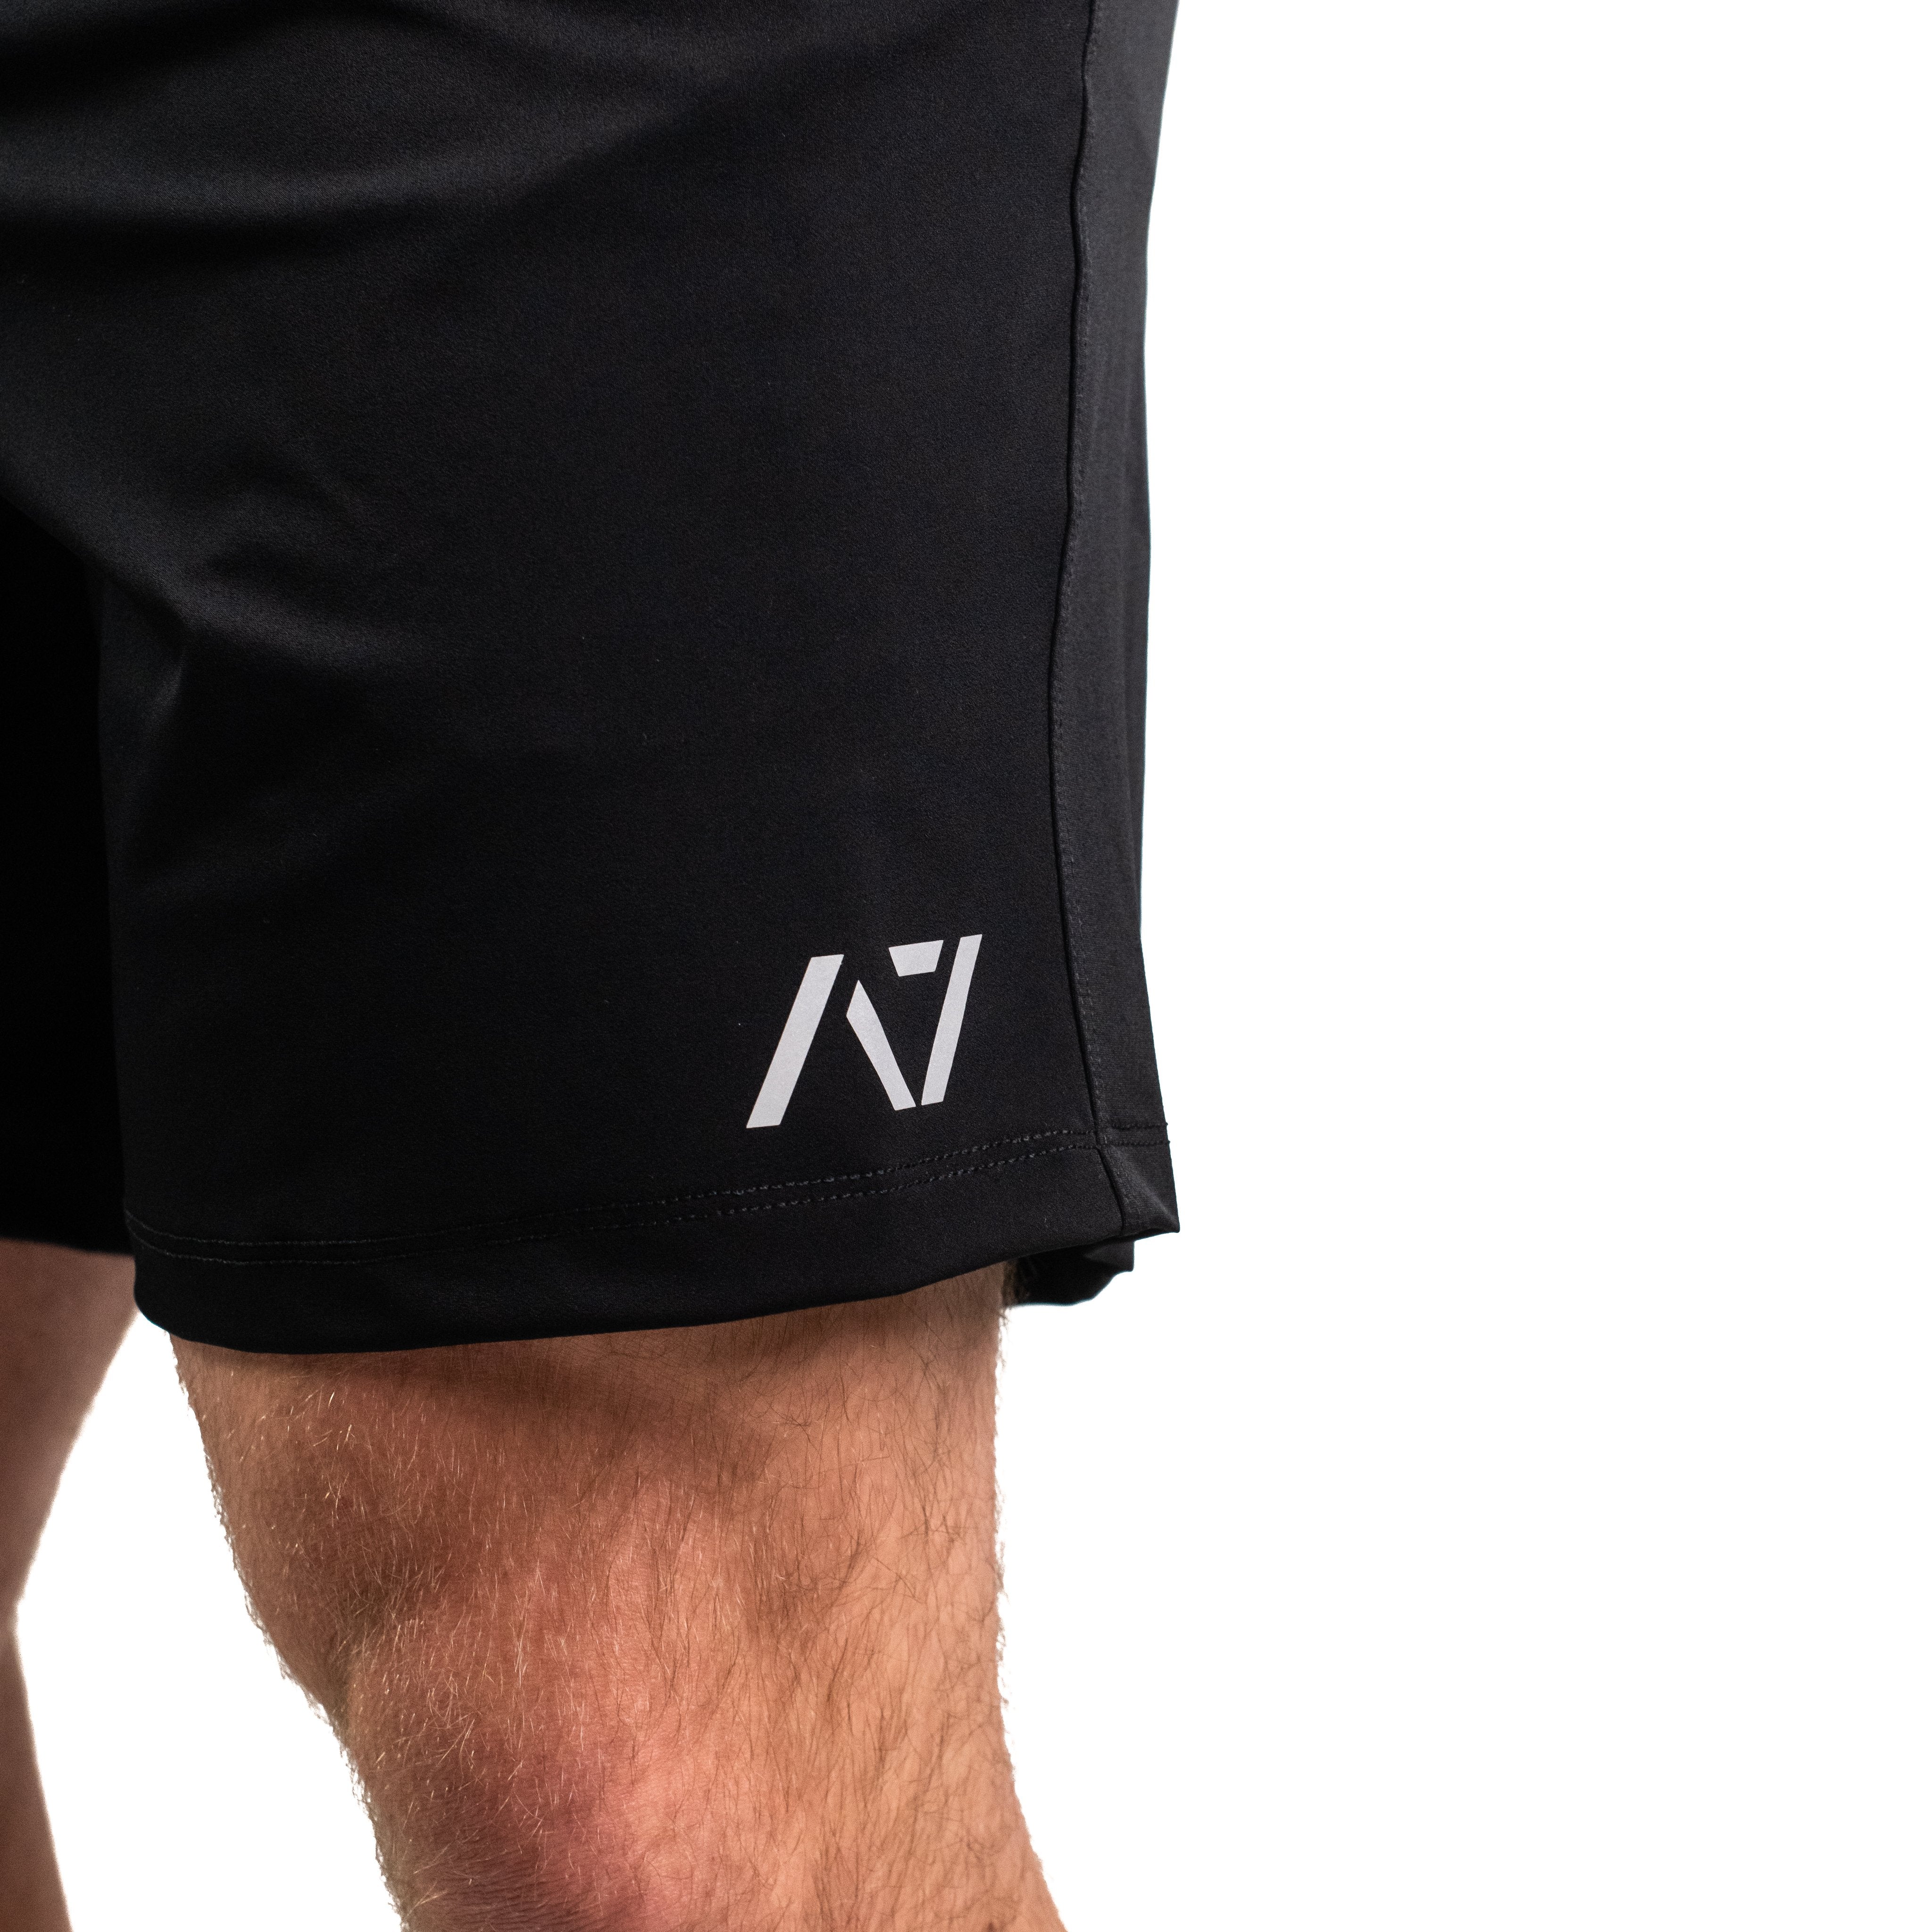 360-GO was created to provide the flexibility for all the movements in your training while offering the comfort and fit you have come to love through our shorts. These shorts offer 360 degrees of stretch in all angles and allow you to remain comfortable without limiting any movement in both training and life environments. 